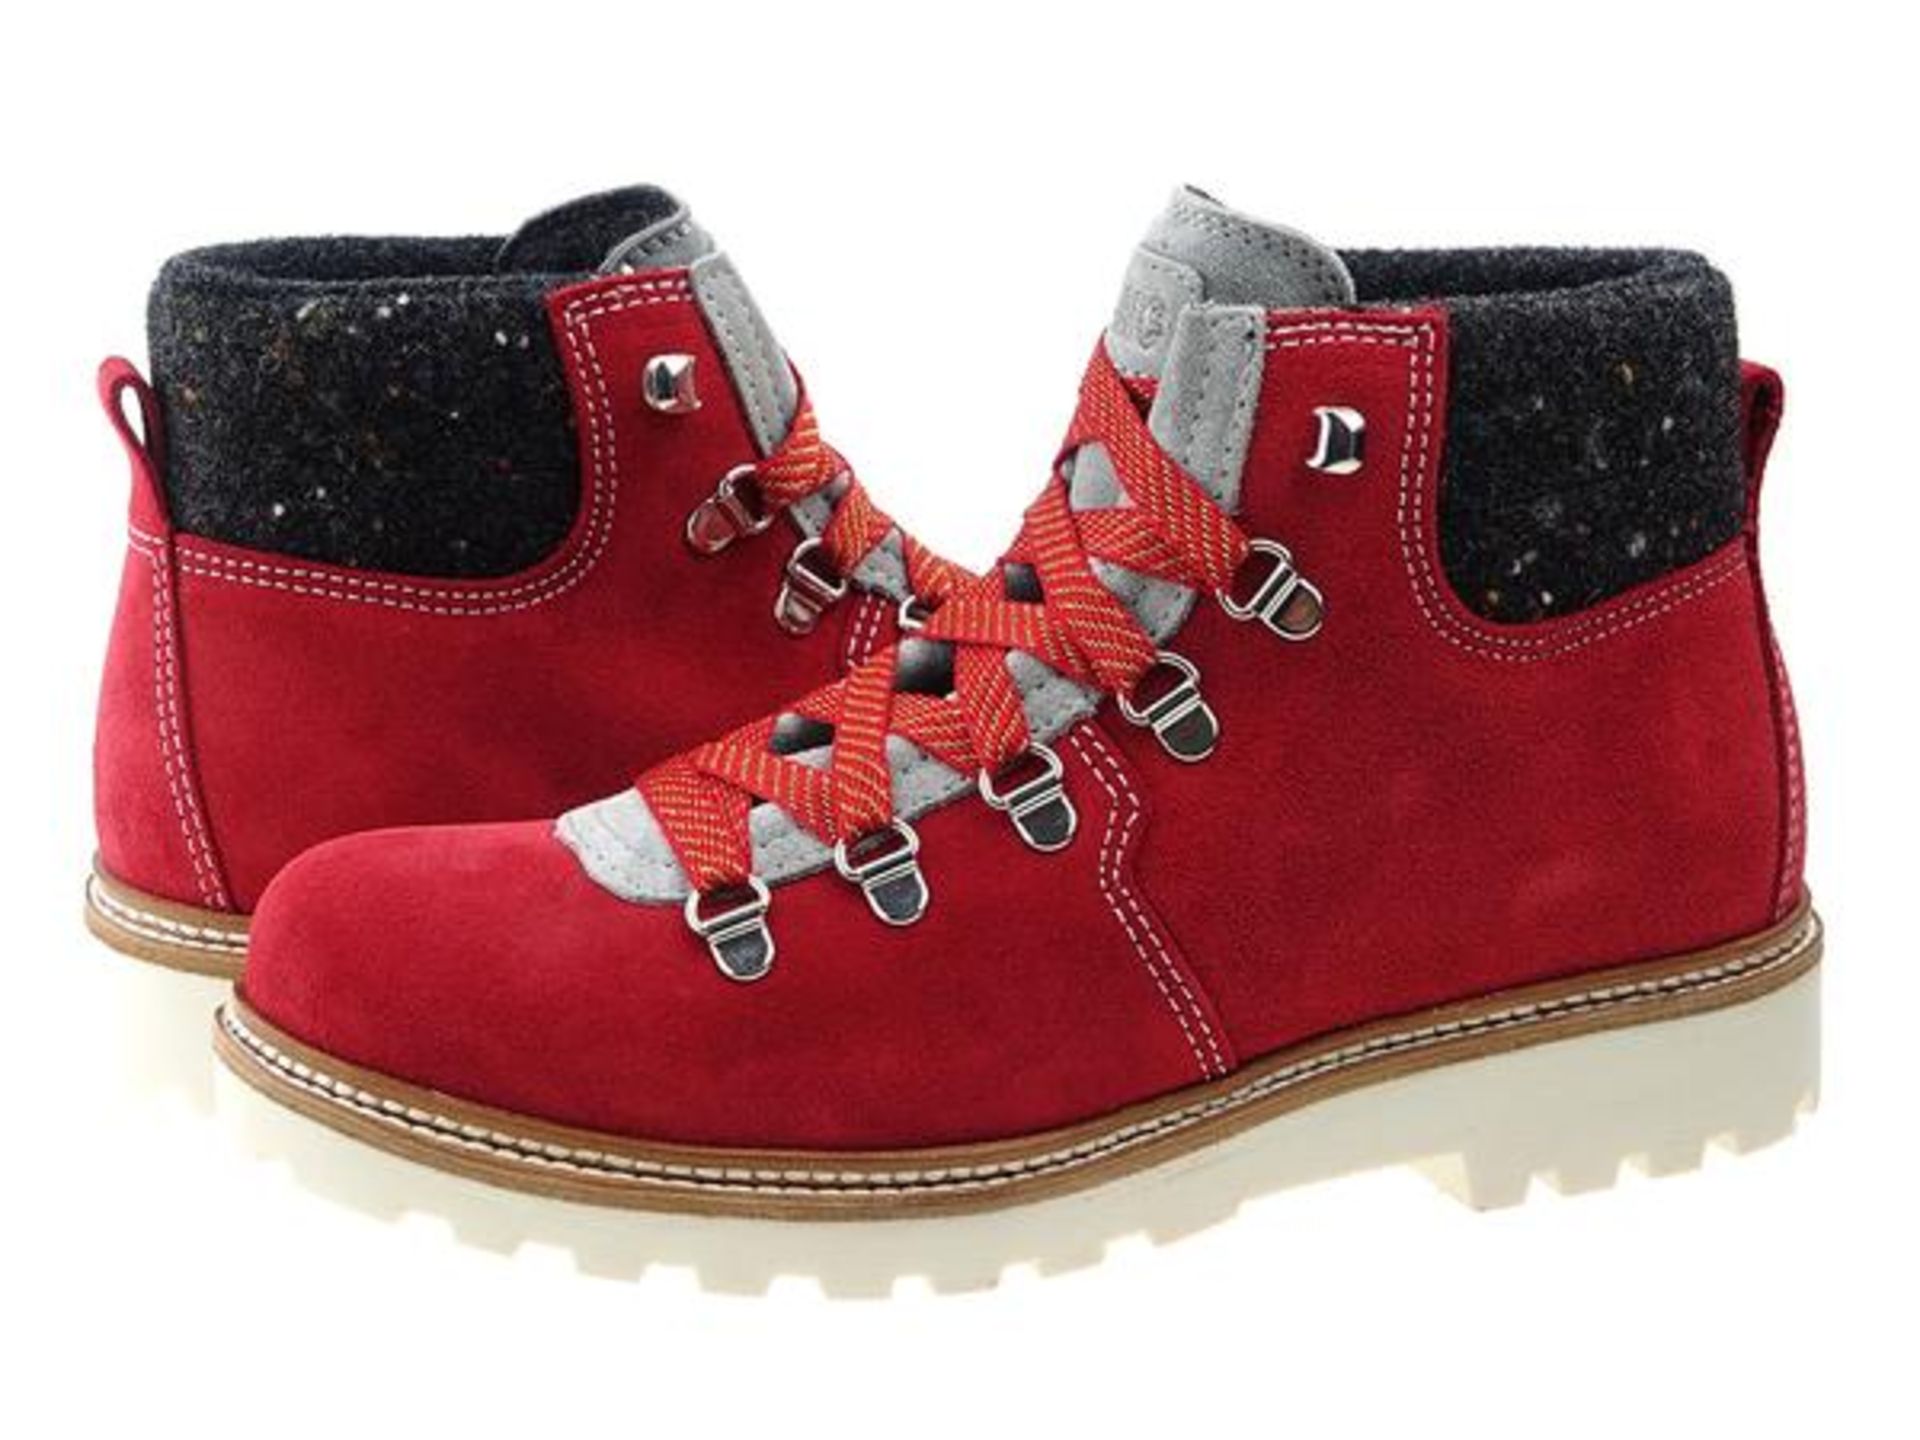 1 x Pair of Designer Olang Merano BTX 815 Rosso Women's Winter Boots - Euro Size 37 - Brand New - Image 3 of 4